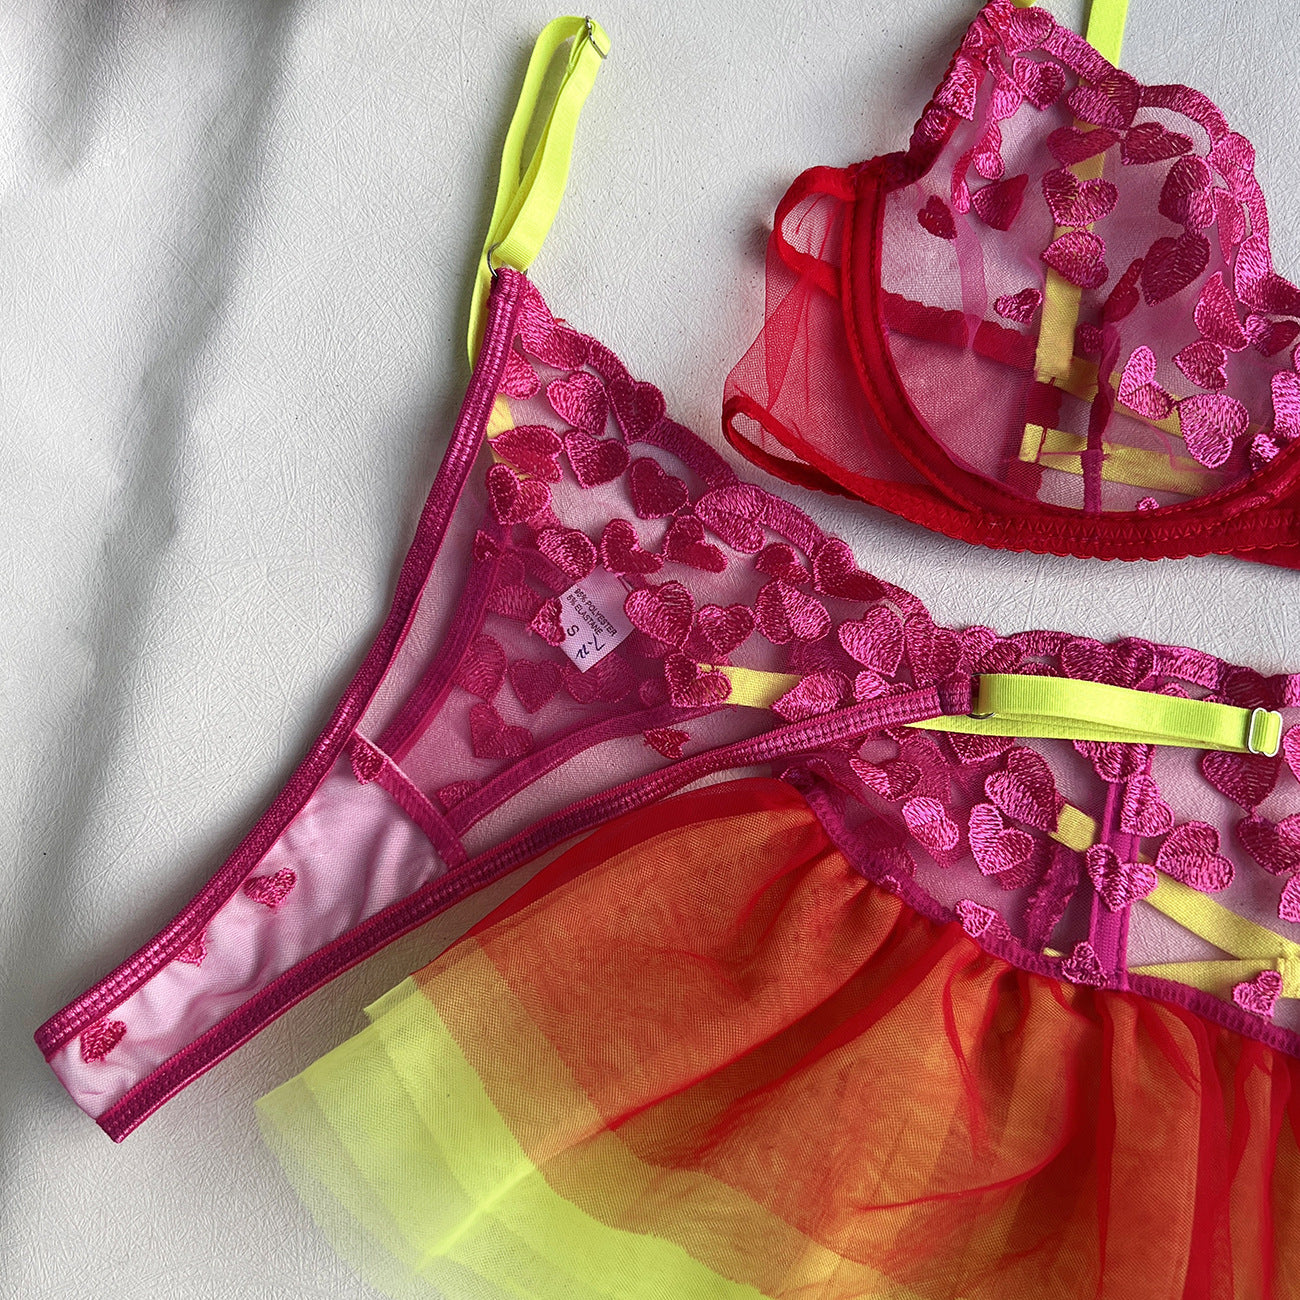 Neon Love Affair: Bright Pink Lingerie Set with Heart Embroidery, Neon Yellow Accents, and Playful RufflesNeon Love Affair: Bright Pink Lingerie Set with Heart Embroidery, Neon Yellow Accents, and Playful Ruffles